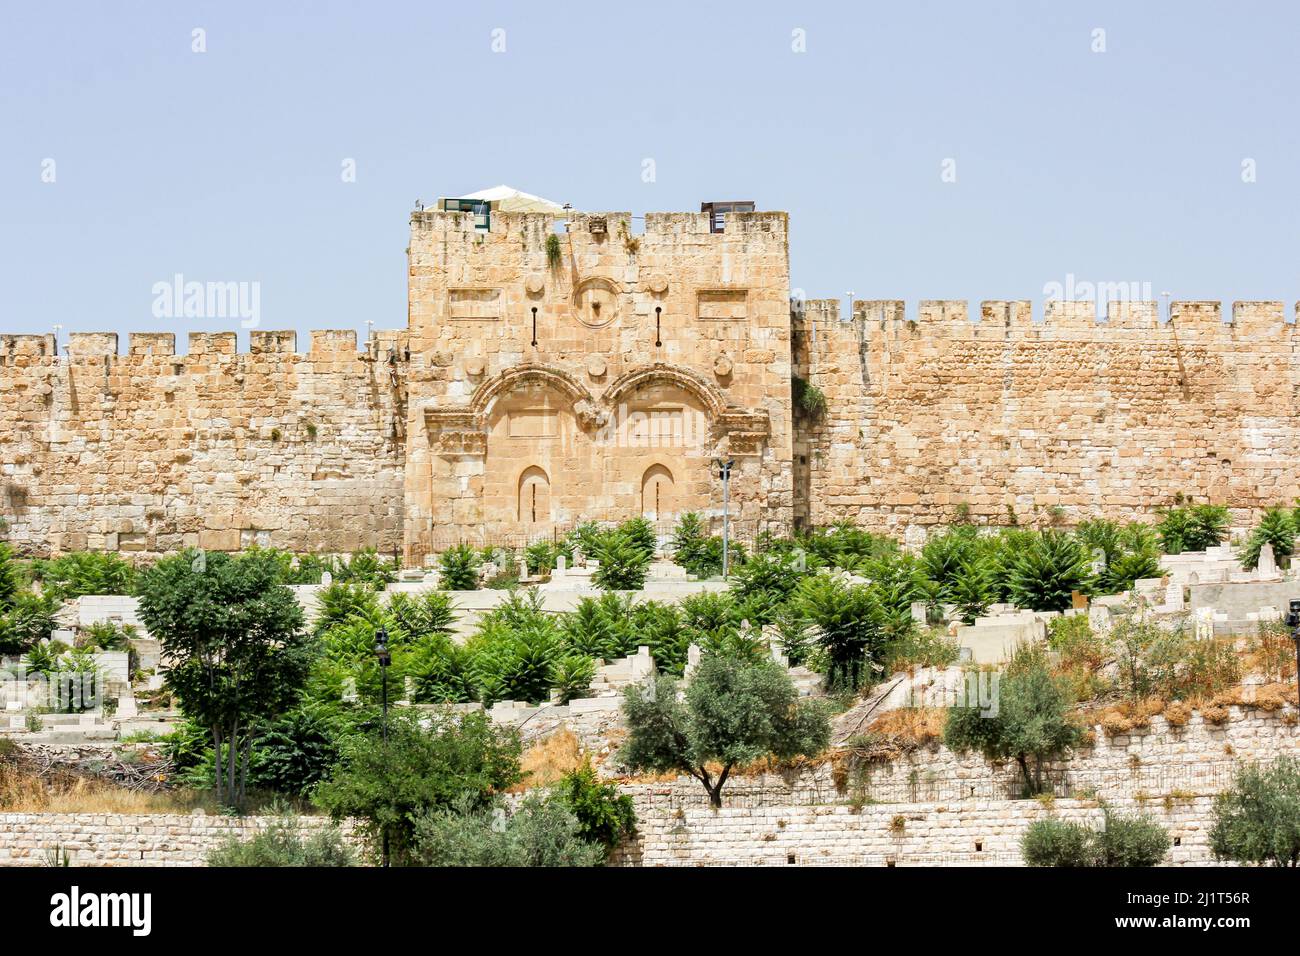 The sealed Golden Gate, or the Gate of Mercy, in the ancient walls of the historic old city of Jerusalem once provided access to the temple mount. Stock Photo